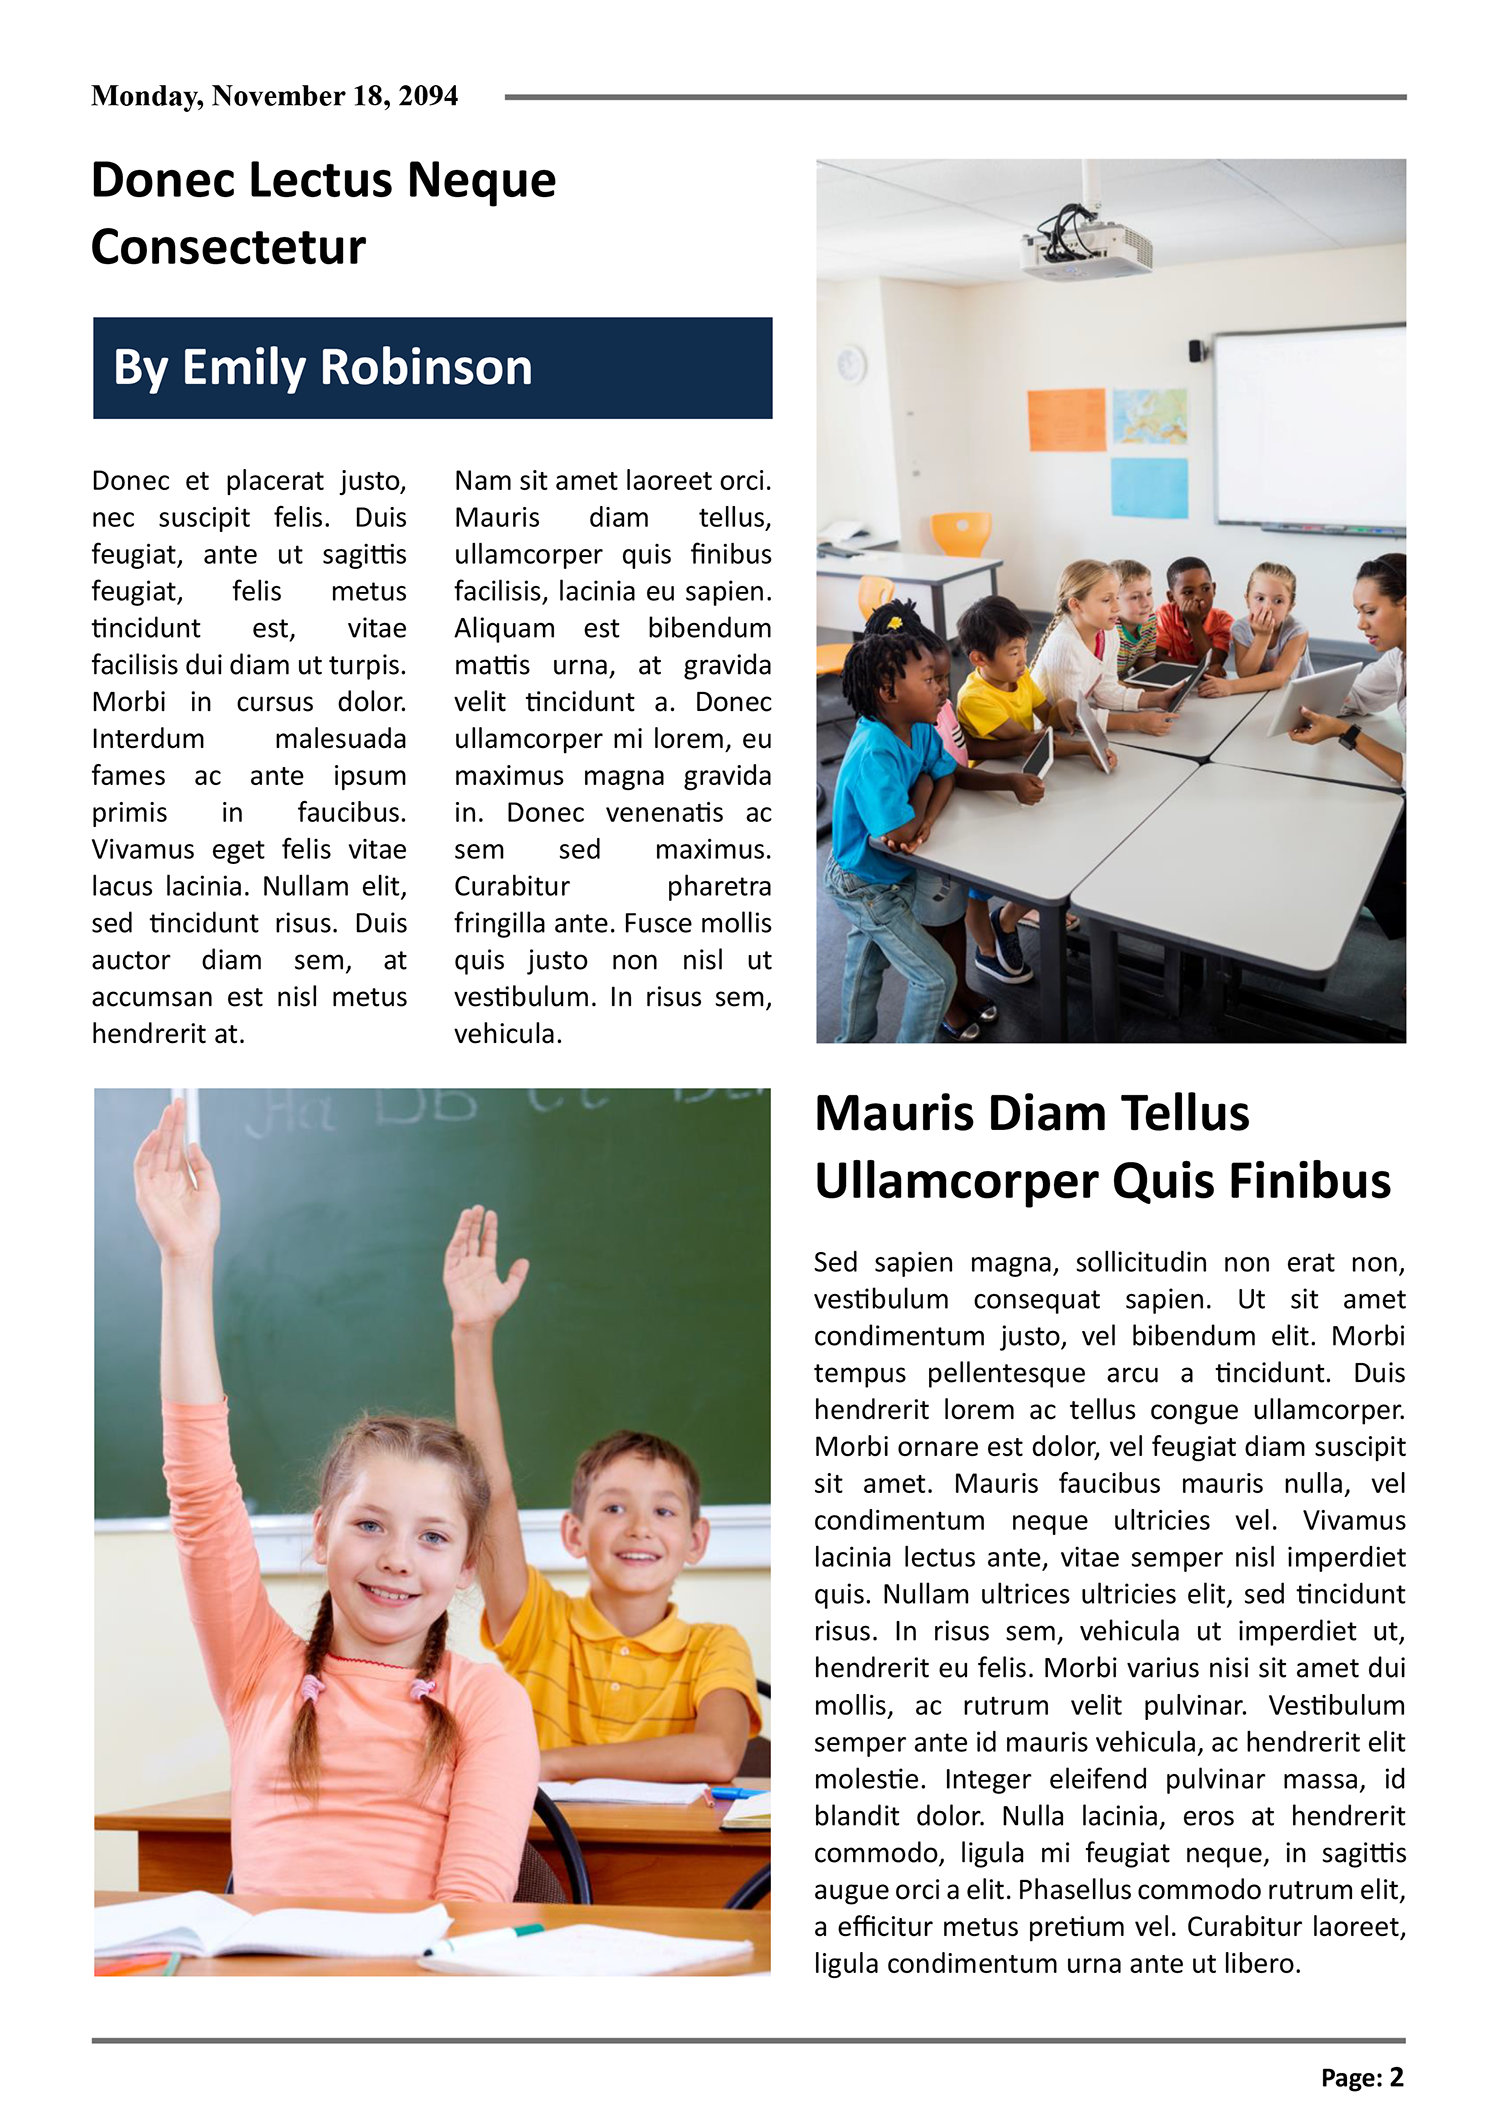 Modern Clean Classroom Newspaper Article Template - Page 02